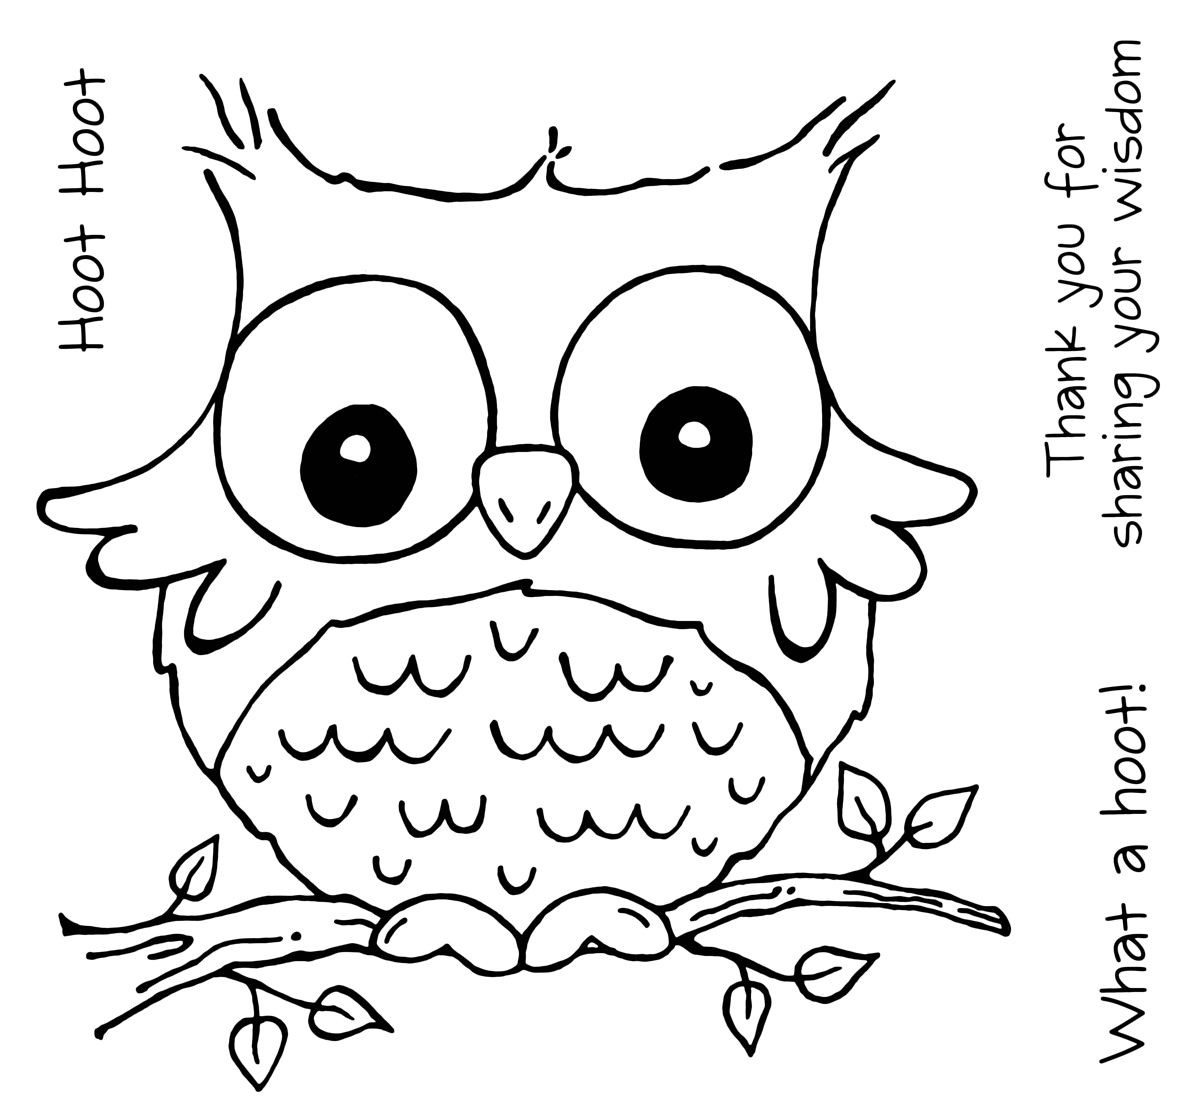 Cute Baby Owl Coloring Pages
 Cute owl coloring pages – Coloring Pages & Cute